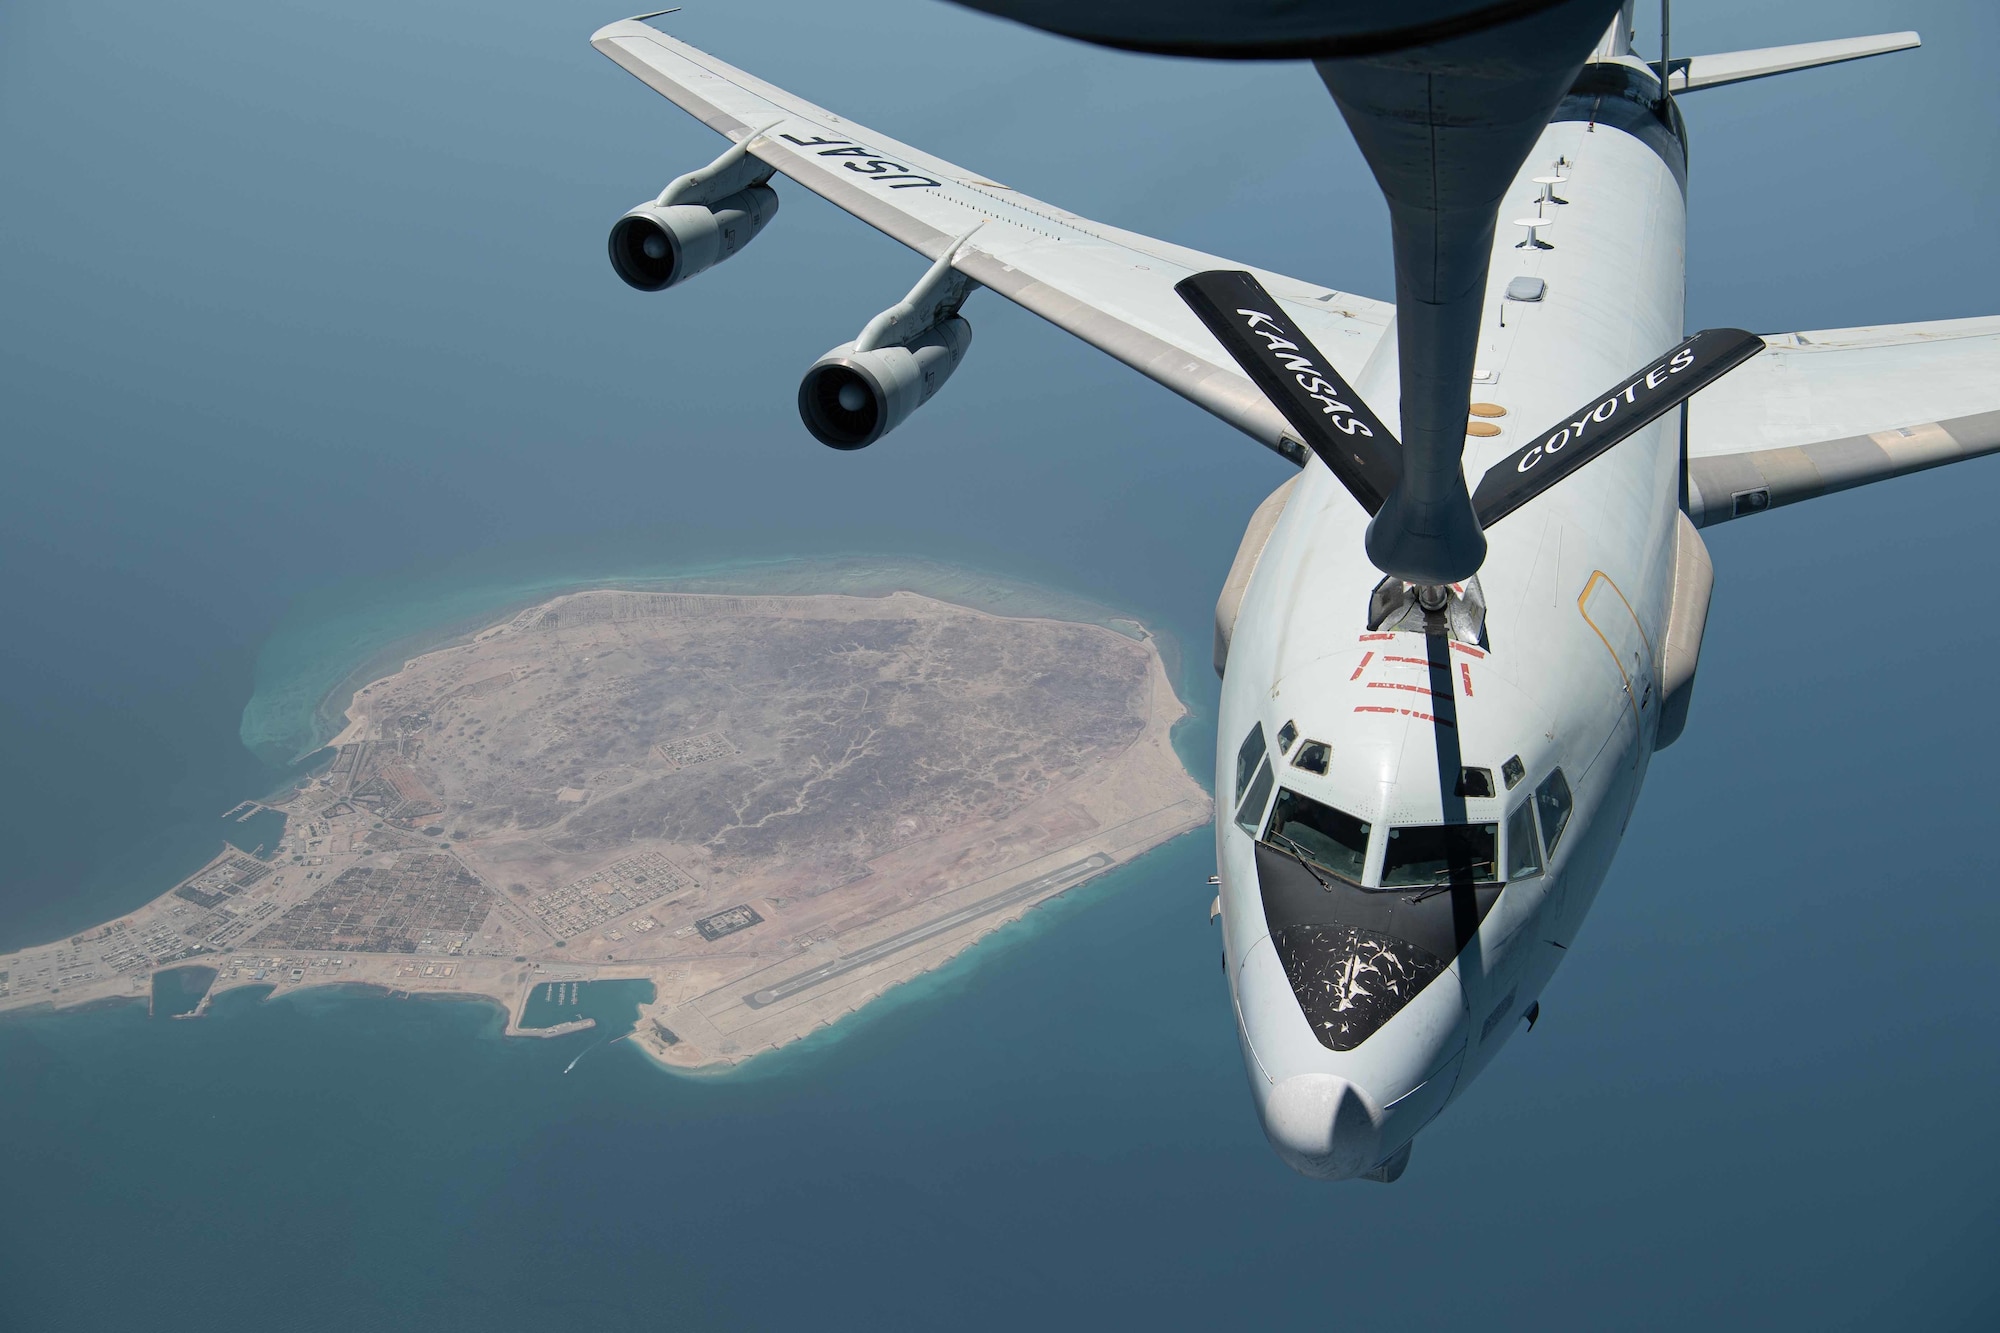 U.S. Air Force Airmen assigned to the 340th Expeditionary Air Refueling Squadron conduct an air refueling mission aboard a U.S. Air Force KC-135 Stratotanker with a U.S. Air Force E-3 Sentry, assigned to the 968th Expeditionary Airborne Air Control Squadron on July 25, 2020. Through joint exercises or direct operations, the 380th Air Expeditionary Wing continues to strengthen relationships with regional and coalition partners to defend the region. (U.S. Air Force photo by Staff Sgt. Justin Parsons)